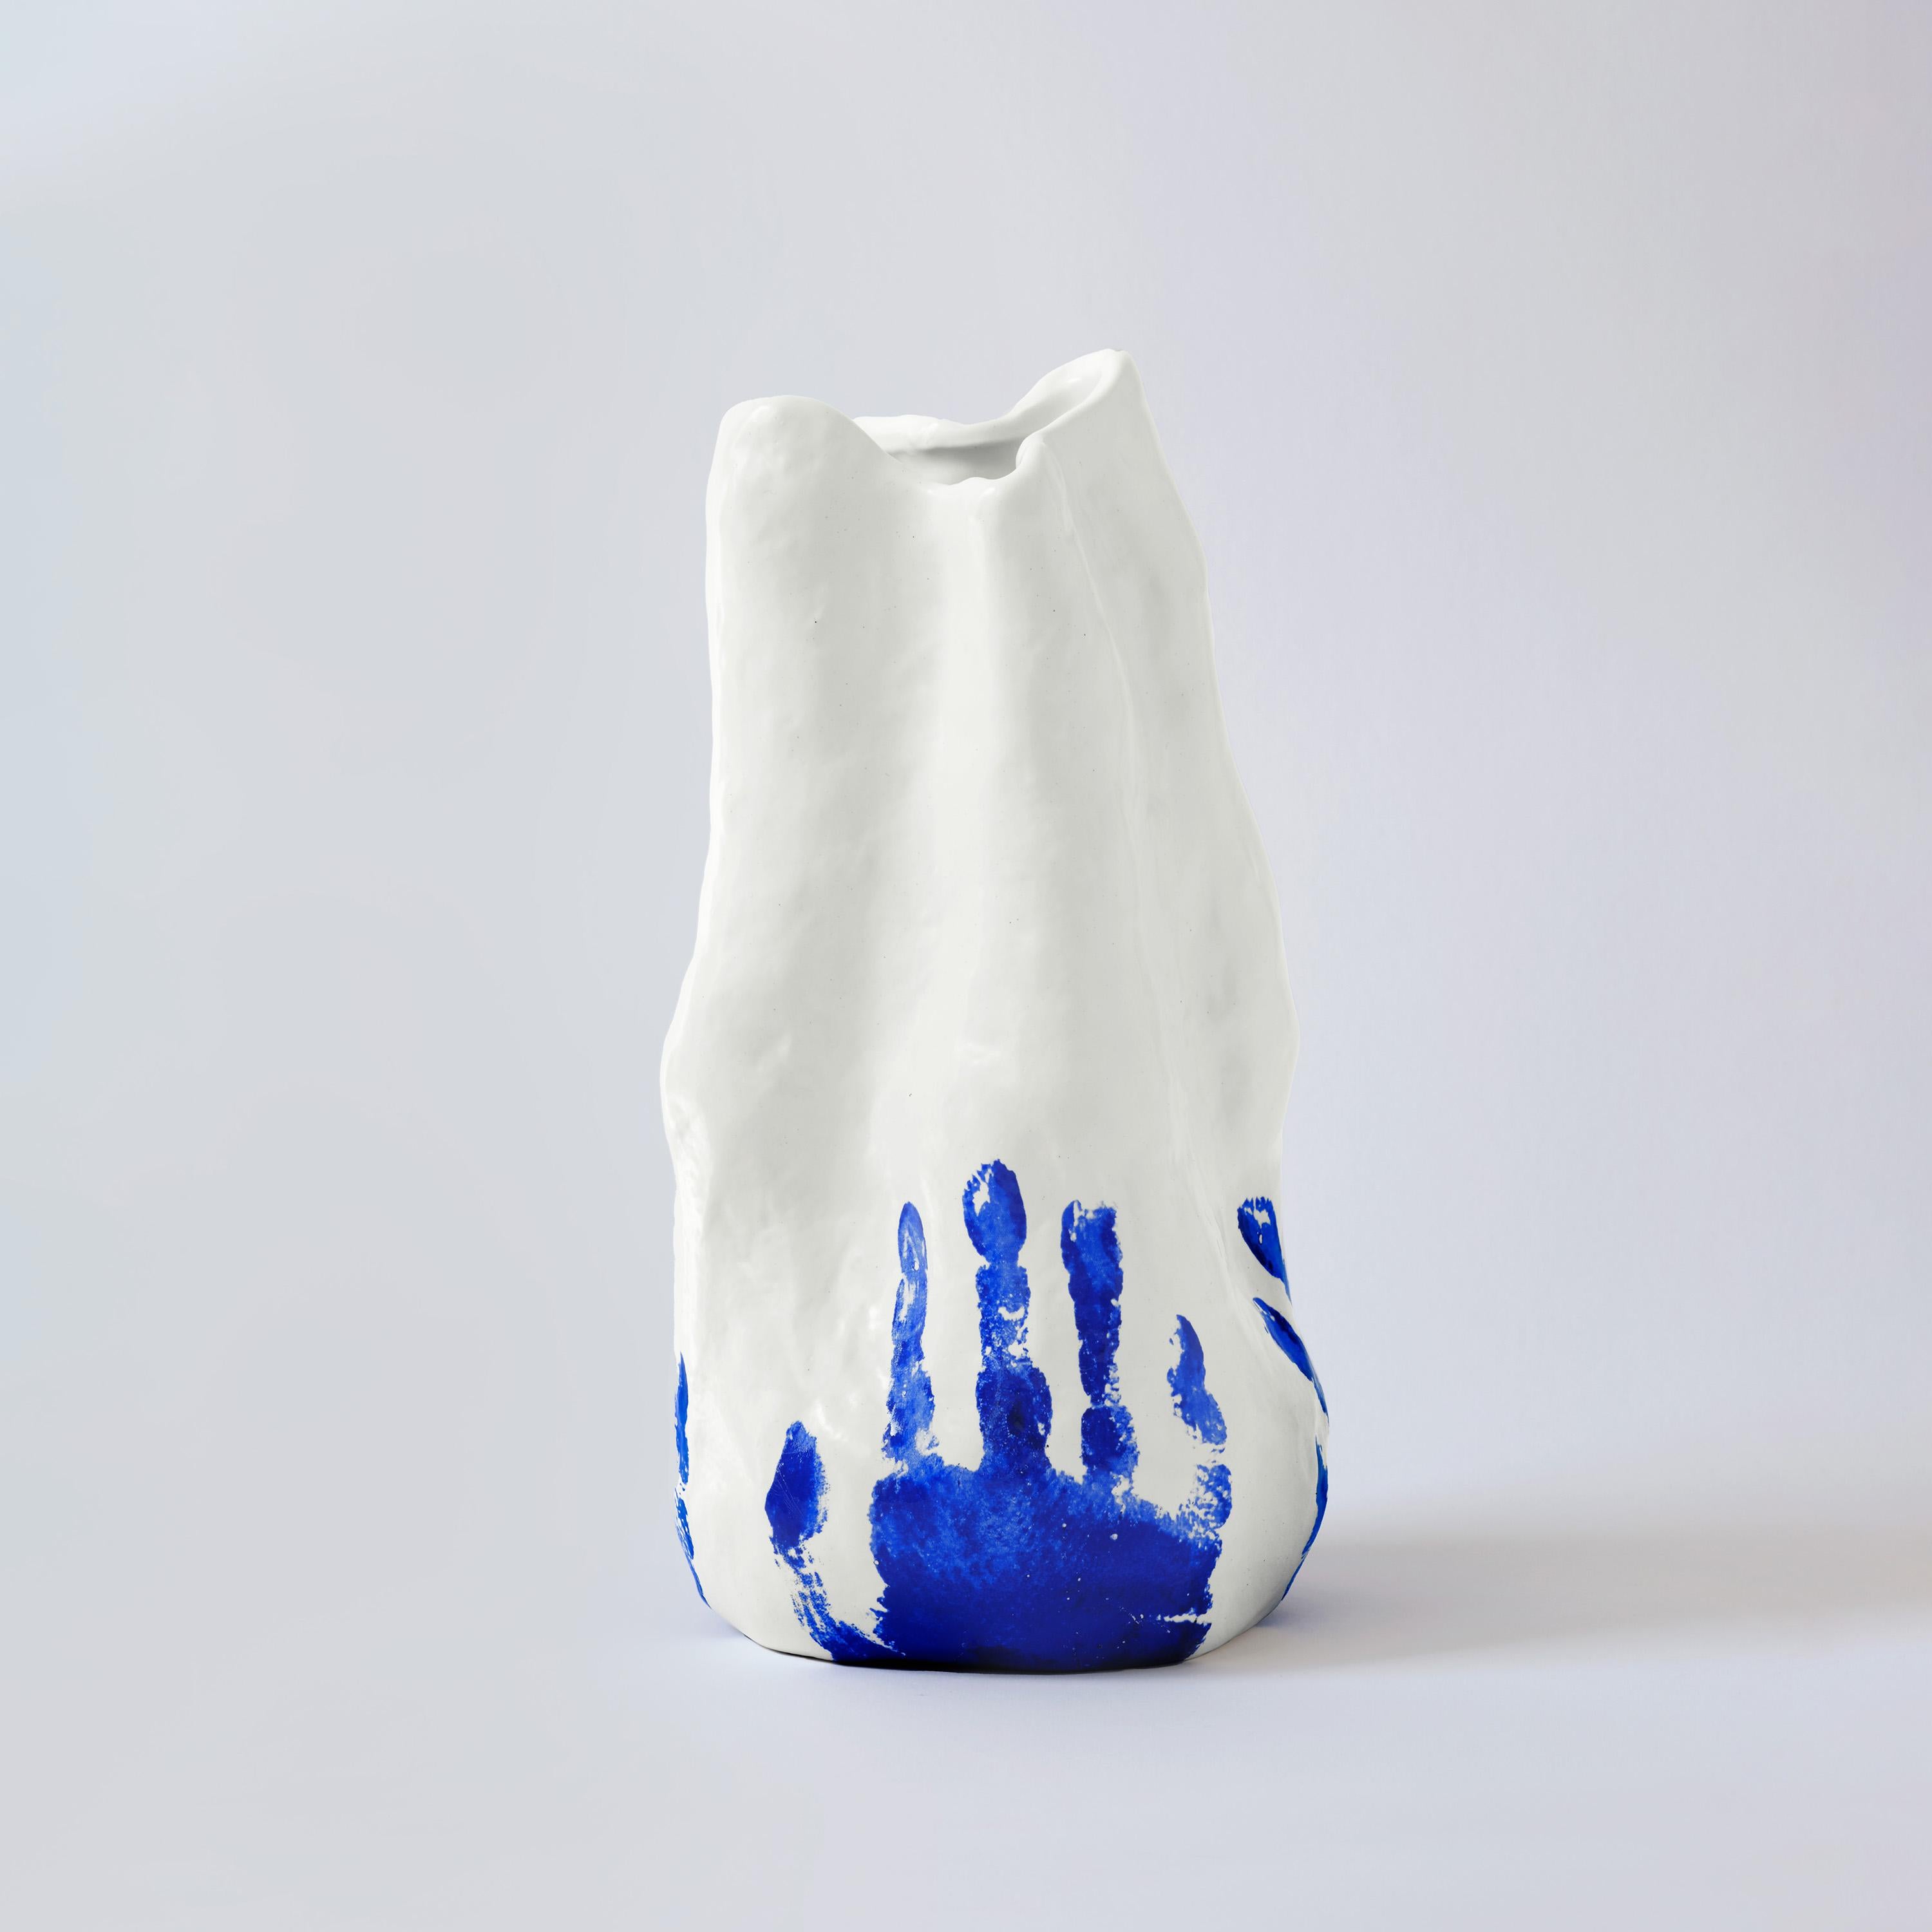 The Georgia vase, with its vibrant handprint color and unique shape, is inspired by the fearless creativity of Yves Klein's artistic vision. Crafted from China porcelain in Chaozhou, the renowned 'capital of porcelain,' with blue handprints produced